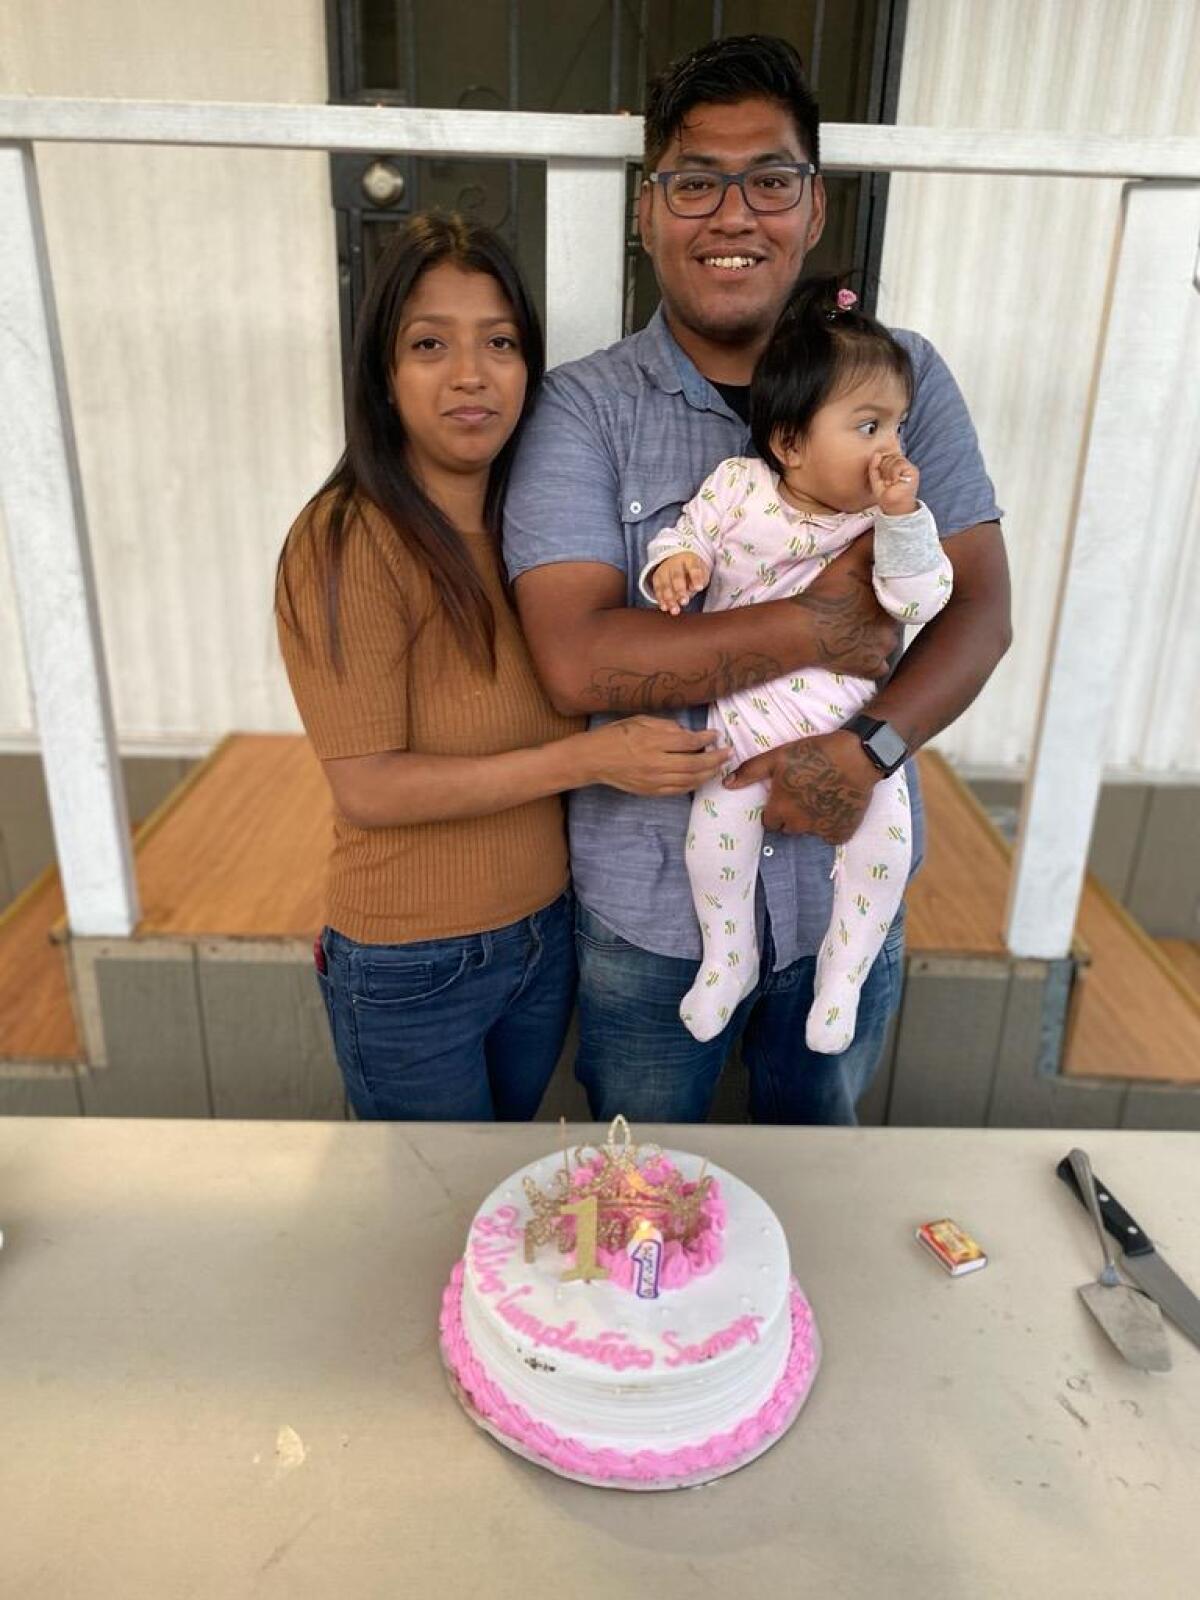 Pictured is Gabriela Andrade, left, and Henry Saldana Meija, right, holding their youngest daughter.